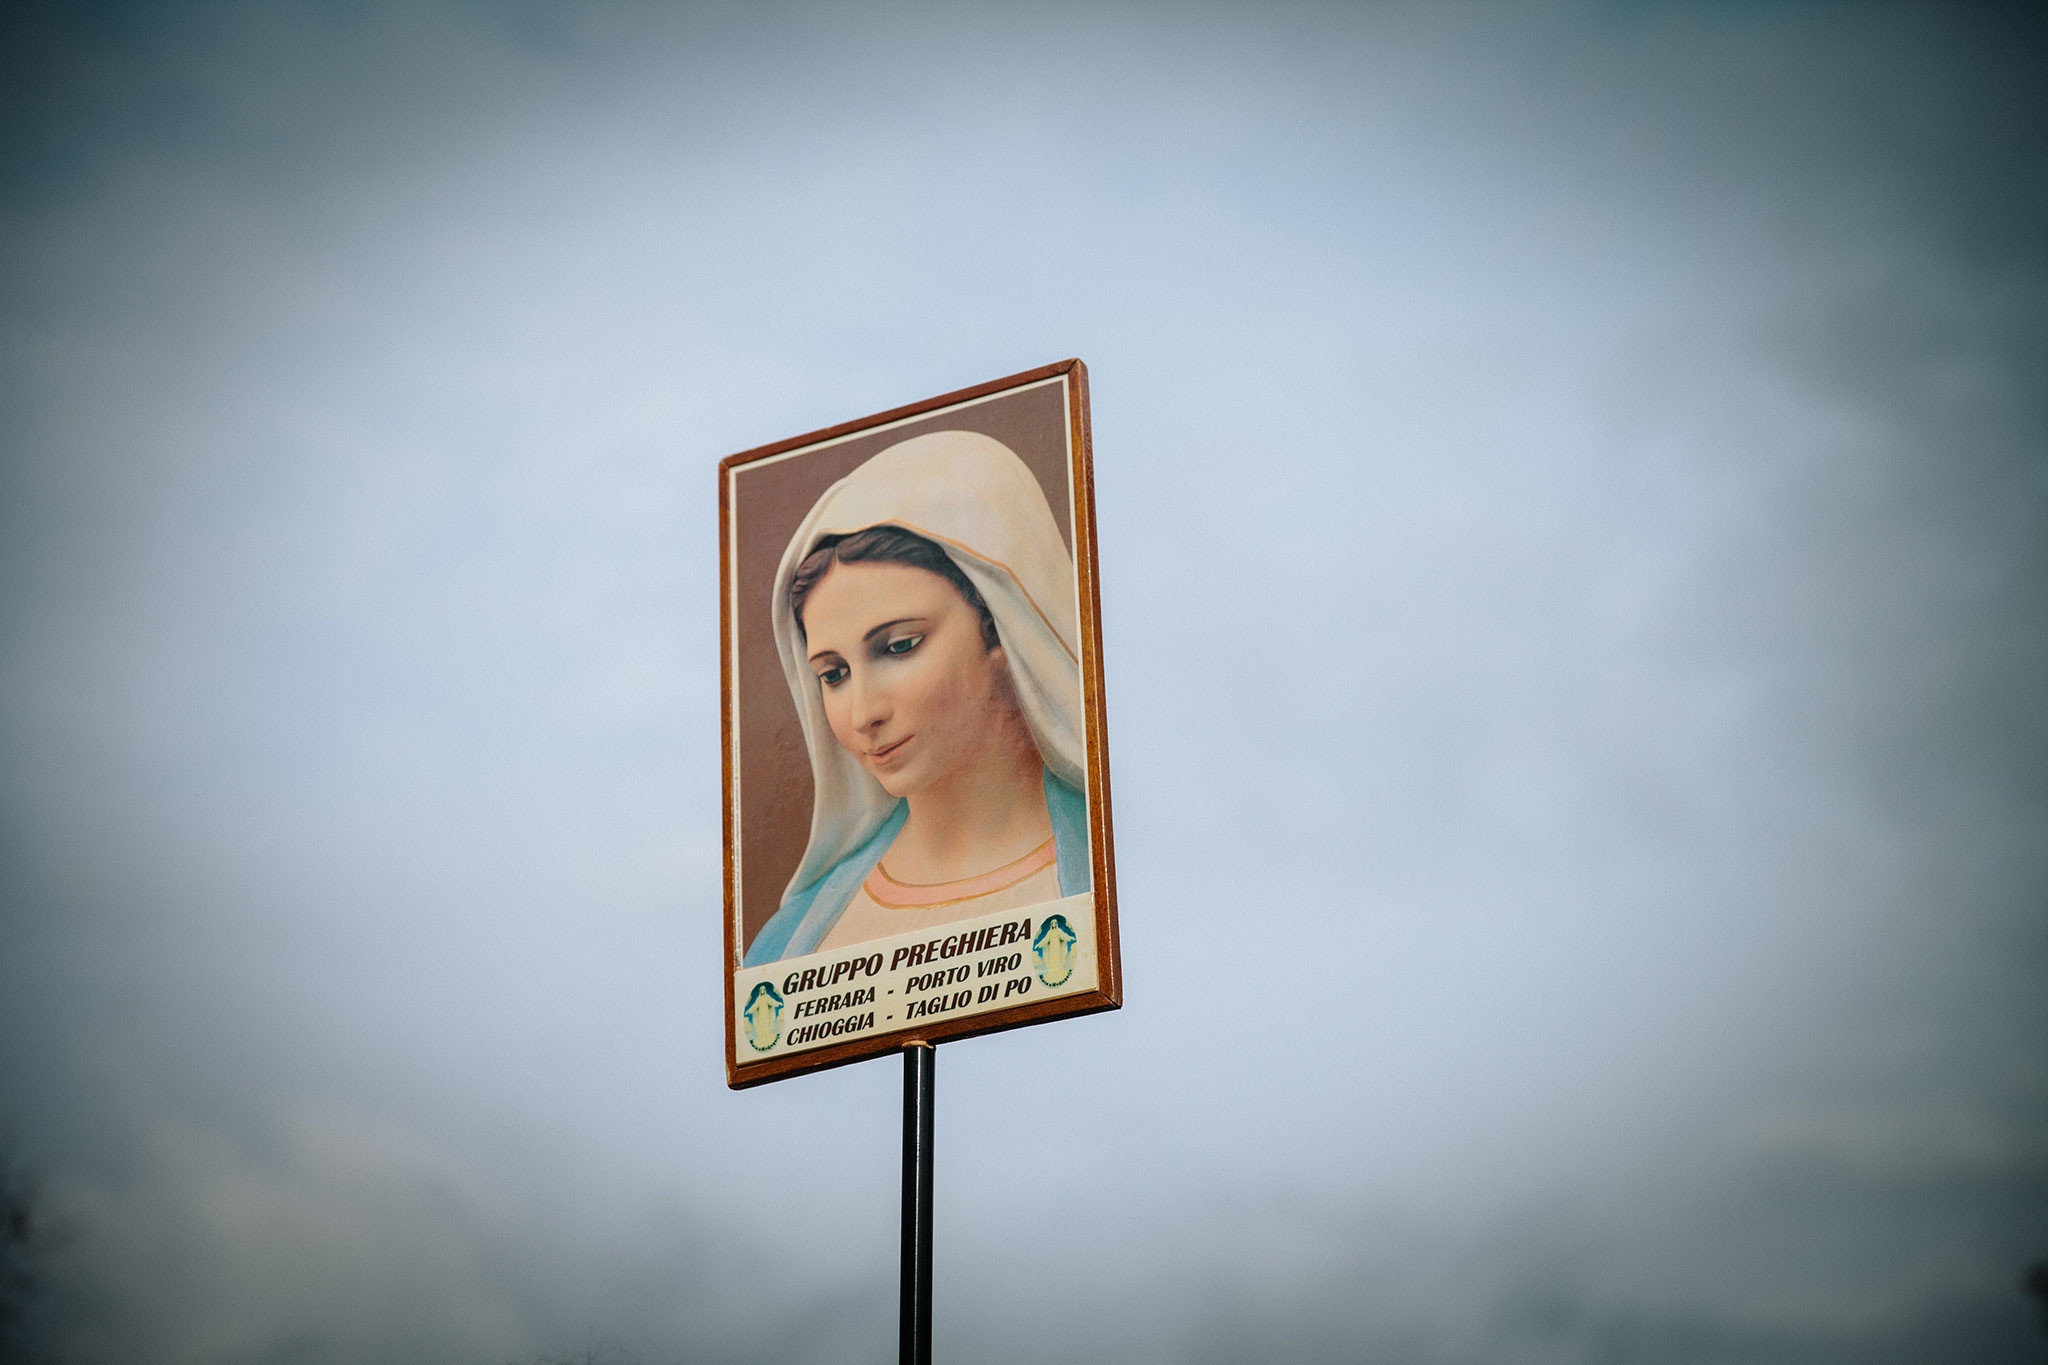 2048x1365 Picture of a sign showing an image of the Virgin Mary